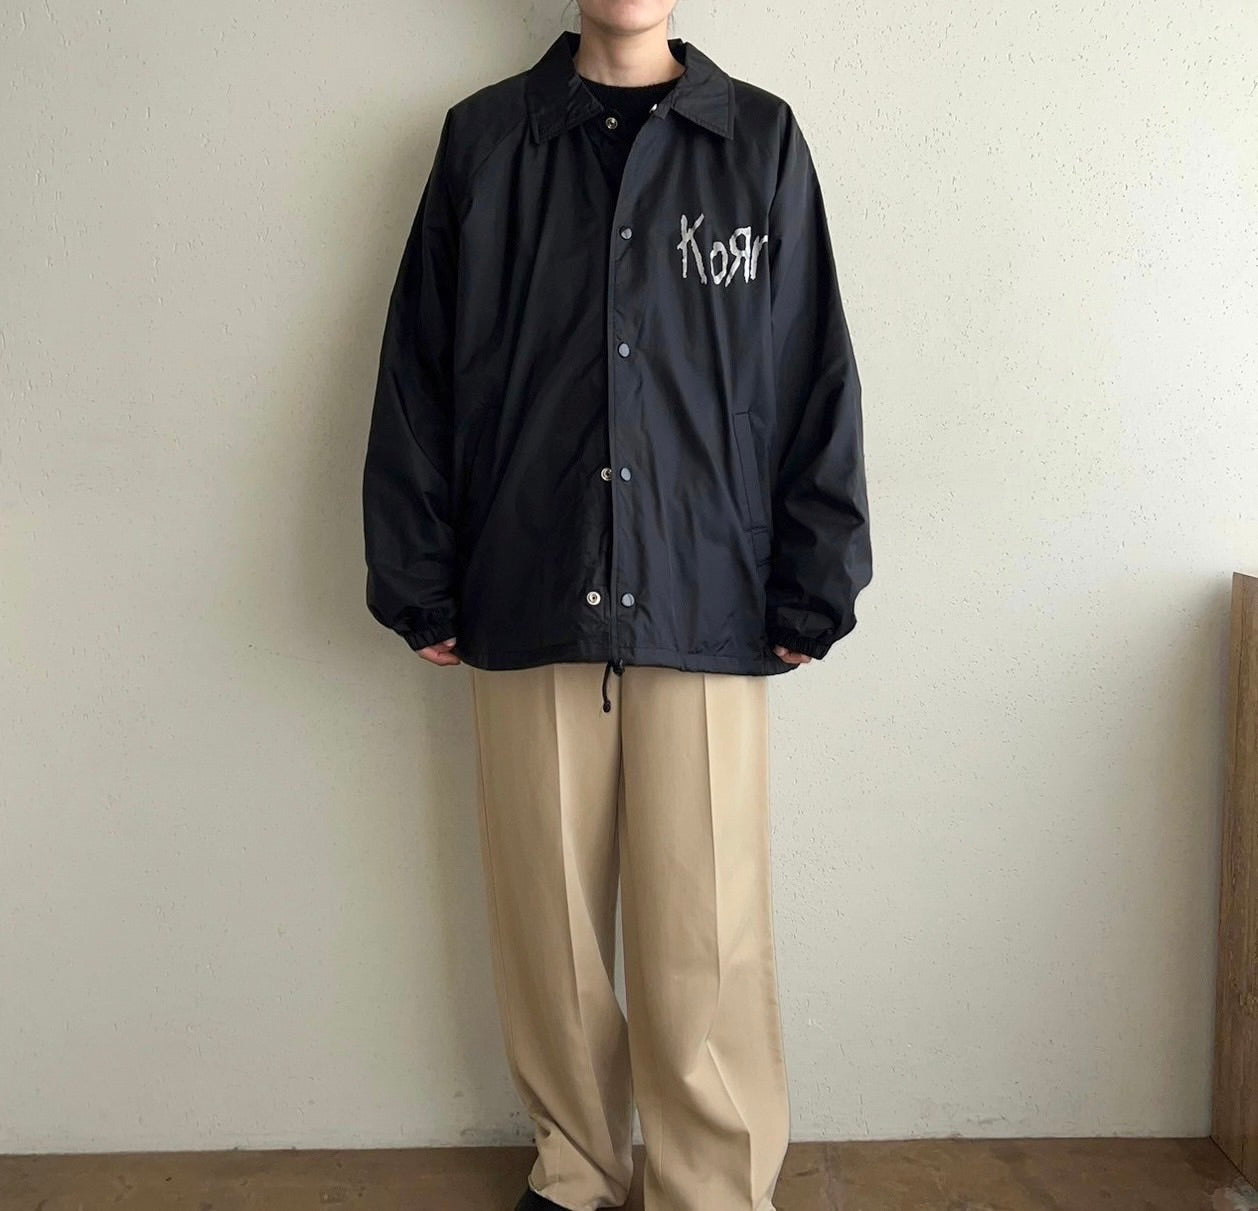 Korn  "Everybody's Got iSSUES Do you" Coaches Jacket